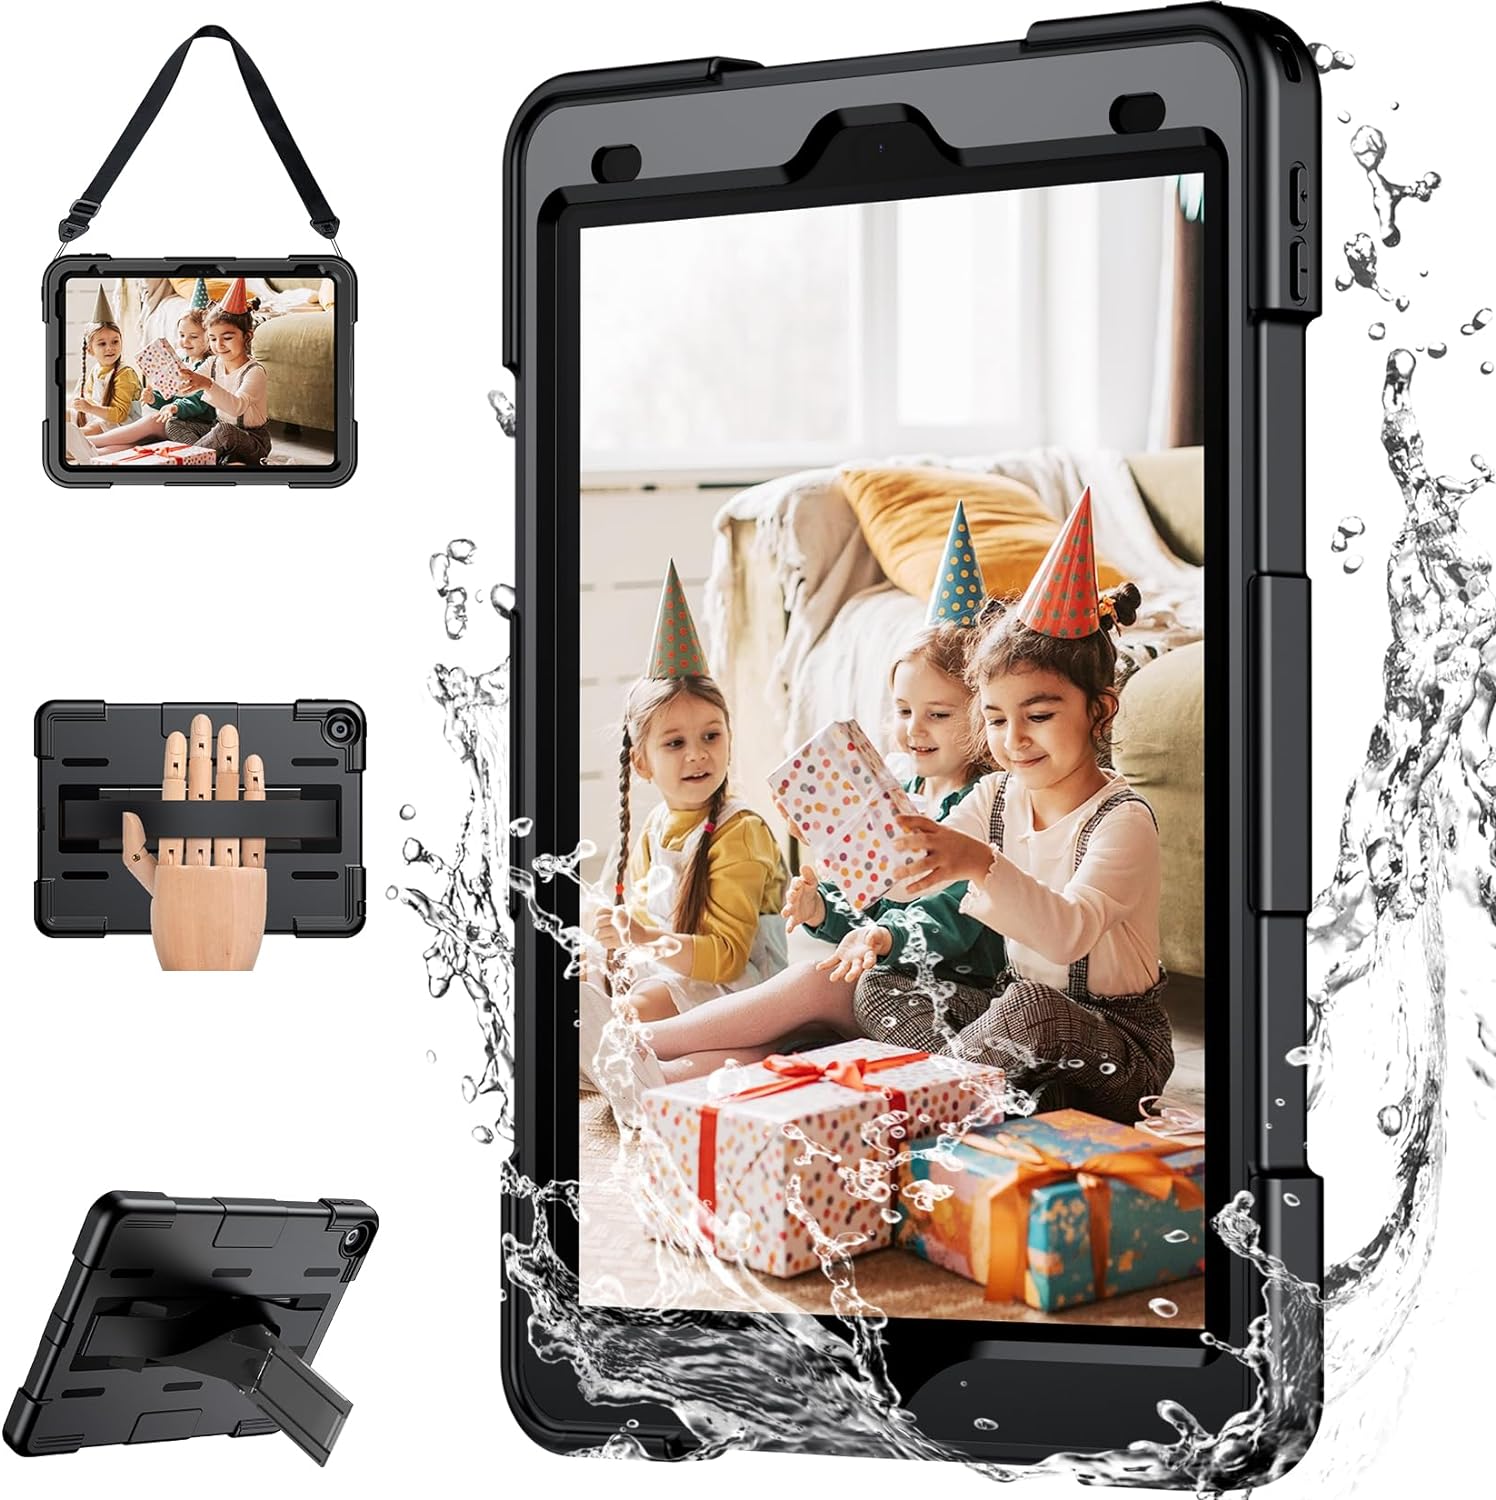   for iPad 9th Generation 10.2 Inch Case,Military Grade Dropproof IP68 Waterproof With Screen Protector&Stand&Hand Strap,Full Body Shockproof for iPad 9th/8th/7th(2021/2020/2019)